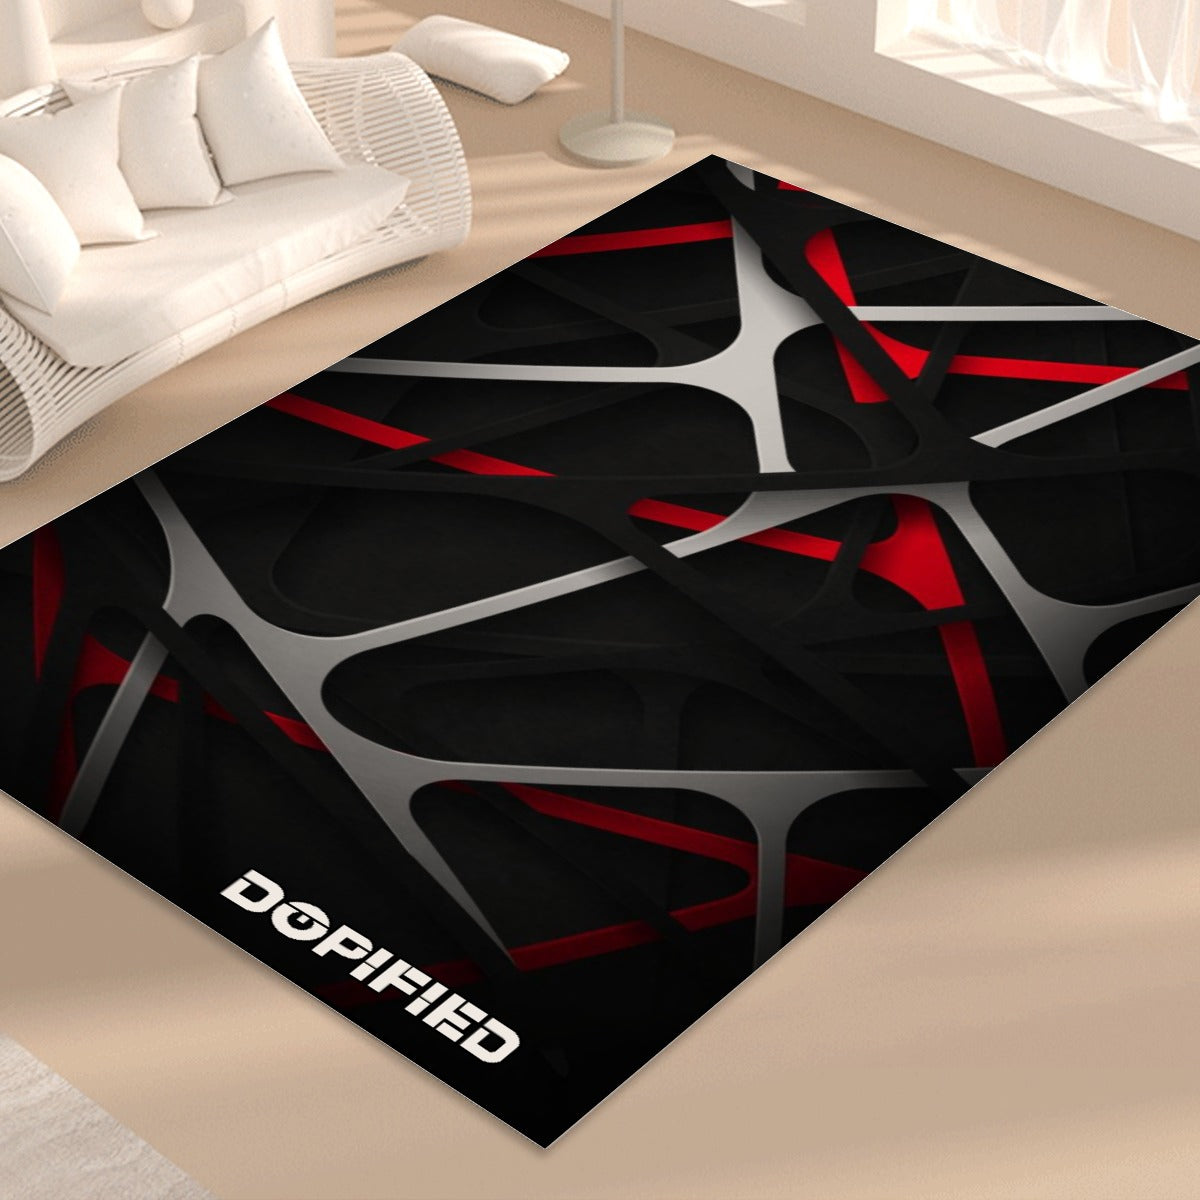 DOPiFiED HoMe Rugs sets, Carpets & More